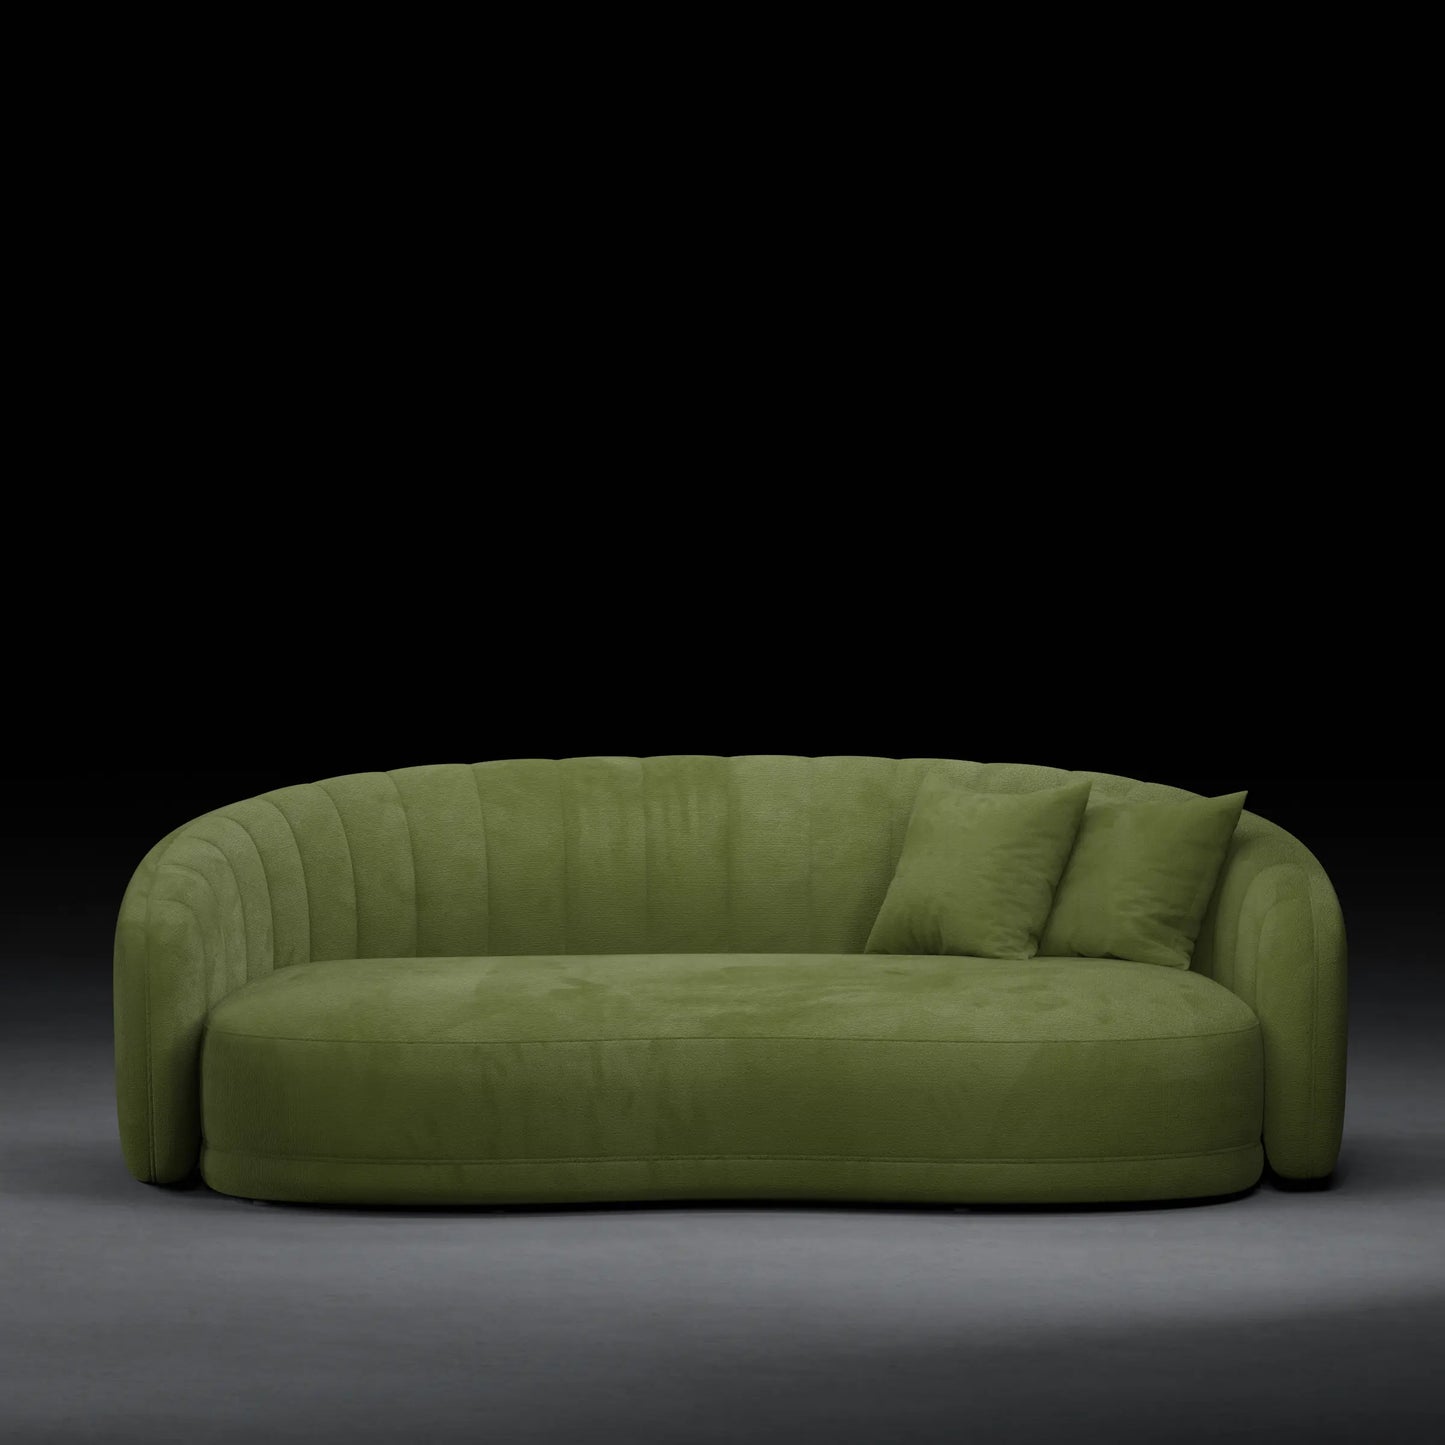 LILY - 3 Seater Couch in Linen Finish | Olive Green Color